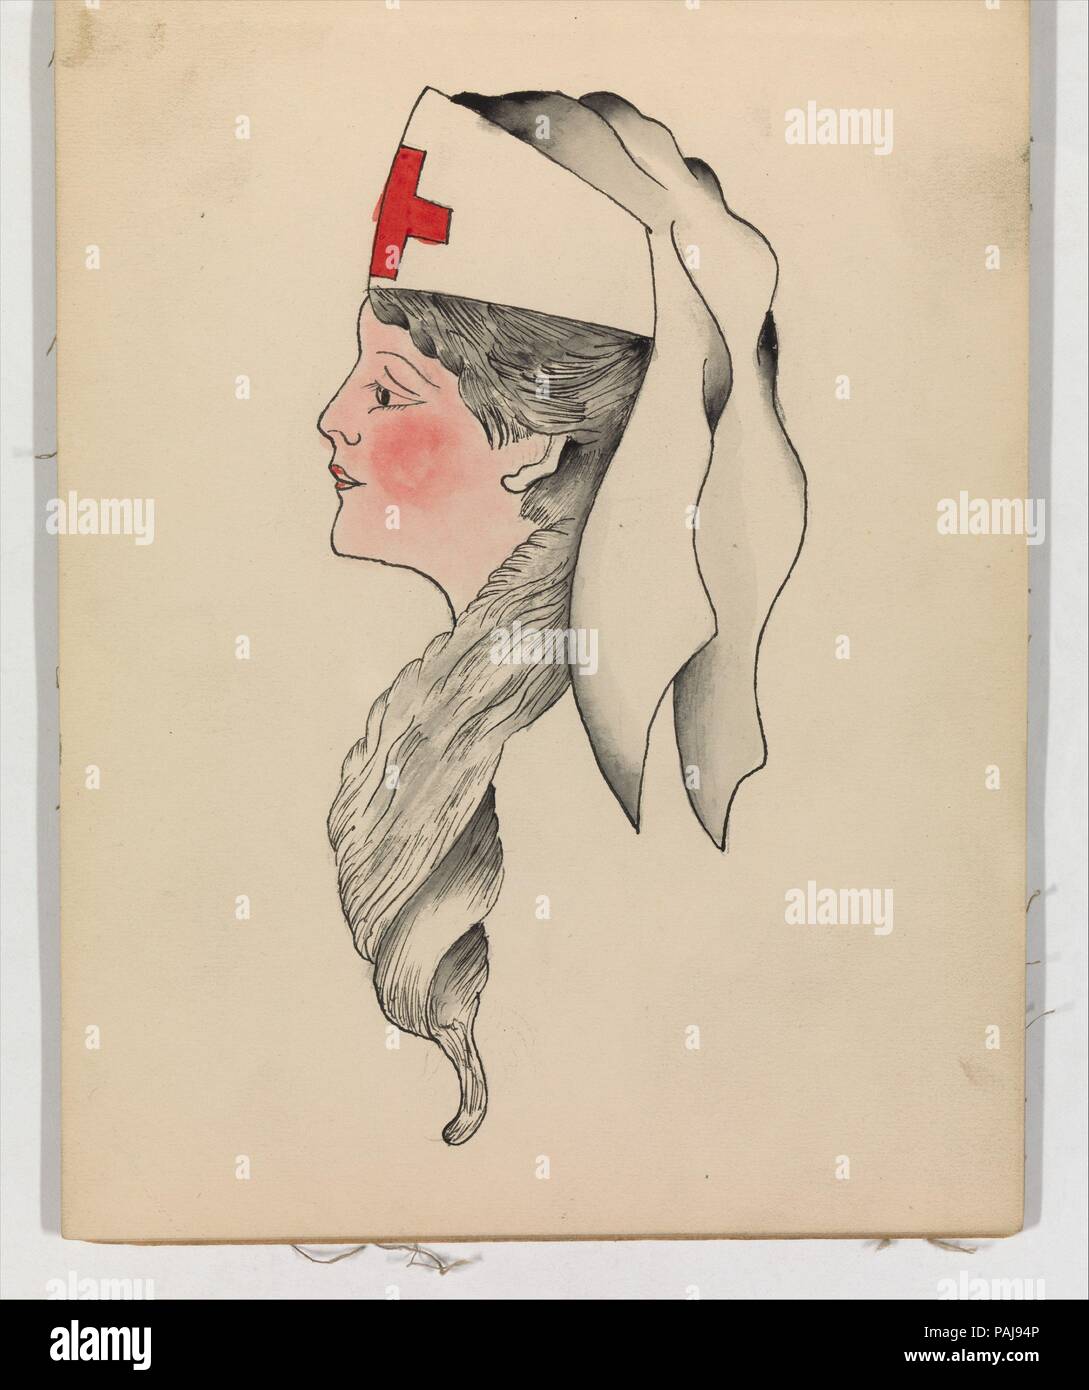 Tattoo Design of an Army Nurse. Artist: Clark & Sellers (American, active 20th century). Dimensions: Sheet: 8 1/4 × 6 1/16 in. (20.9 × 15.4 cm). Date: ca. 1900-1945. Museum: Metropolitan Museum of Art, New York, USA. Stock Photo